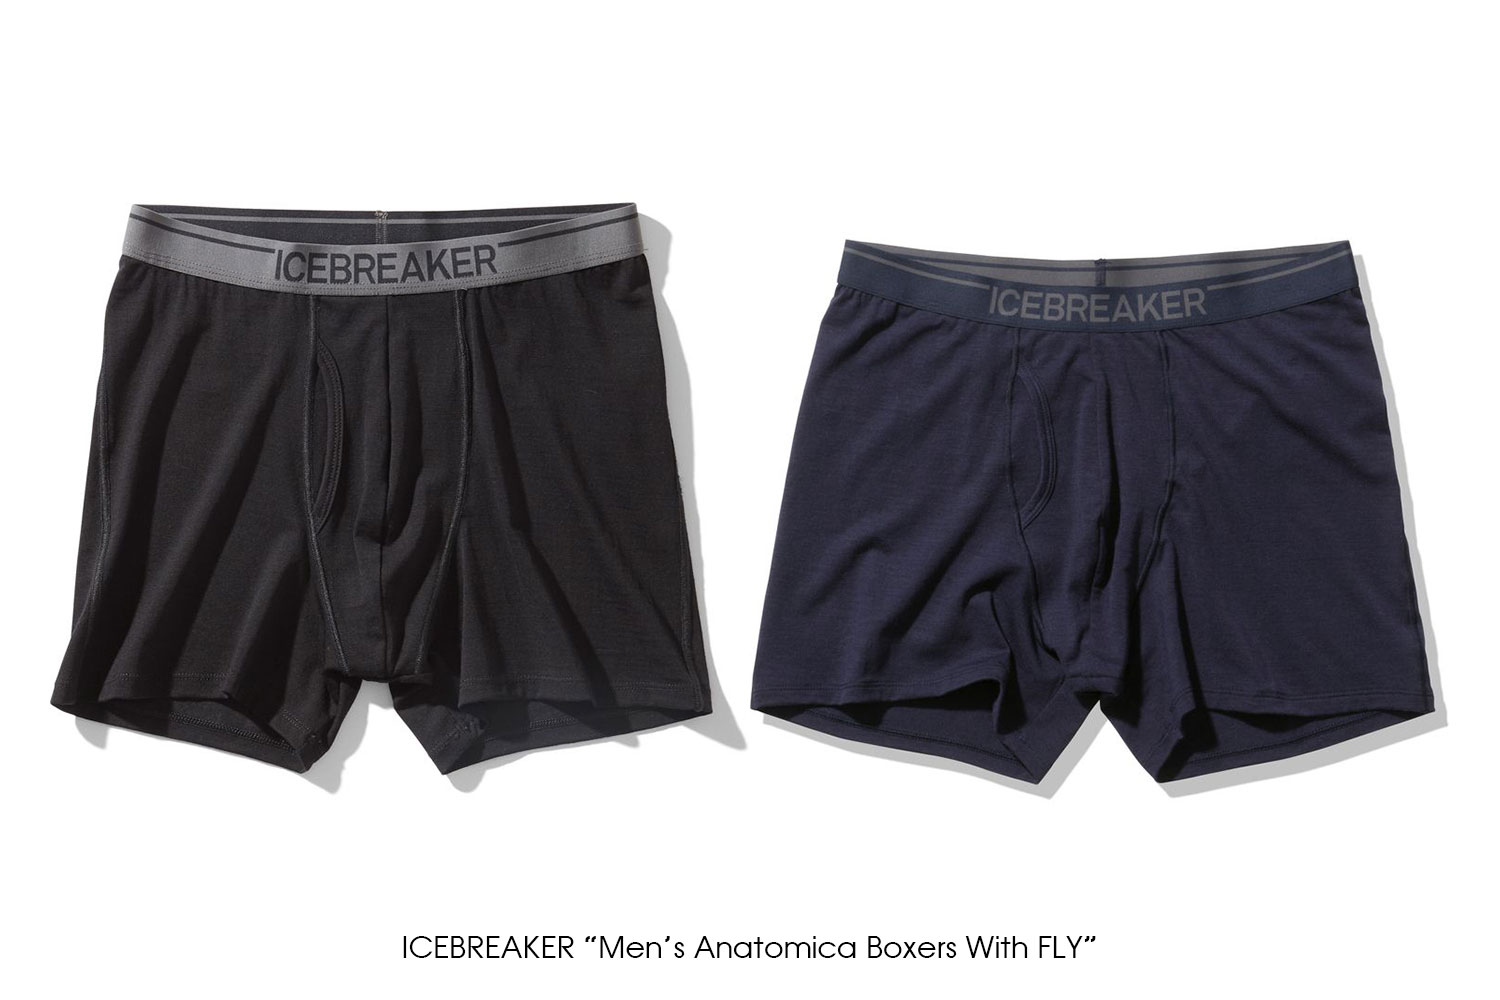 ICEBREAKER "Men's Anatomica Boxers With Fly"